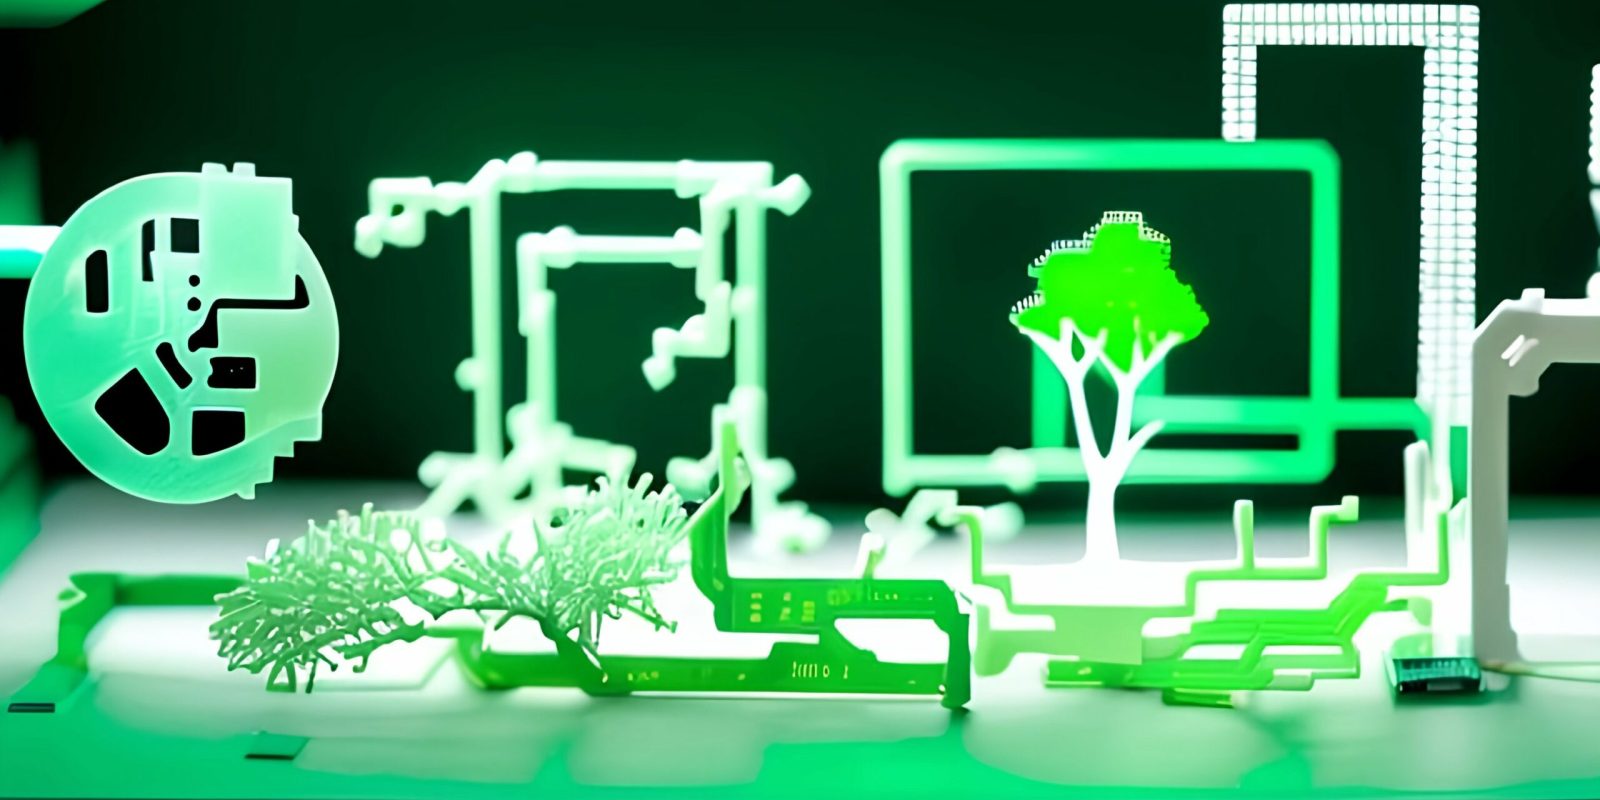 openart-a-tree-made-of-artificial-tech-parts-in-a-light-green-environment_twJs9ikp_upscaled